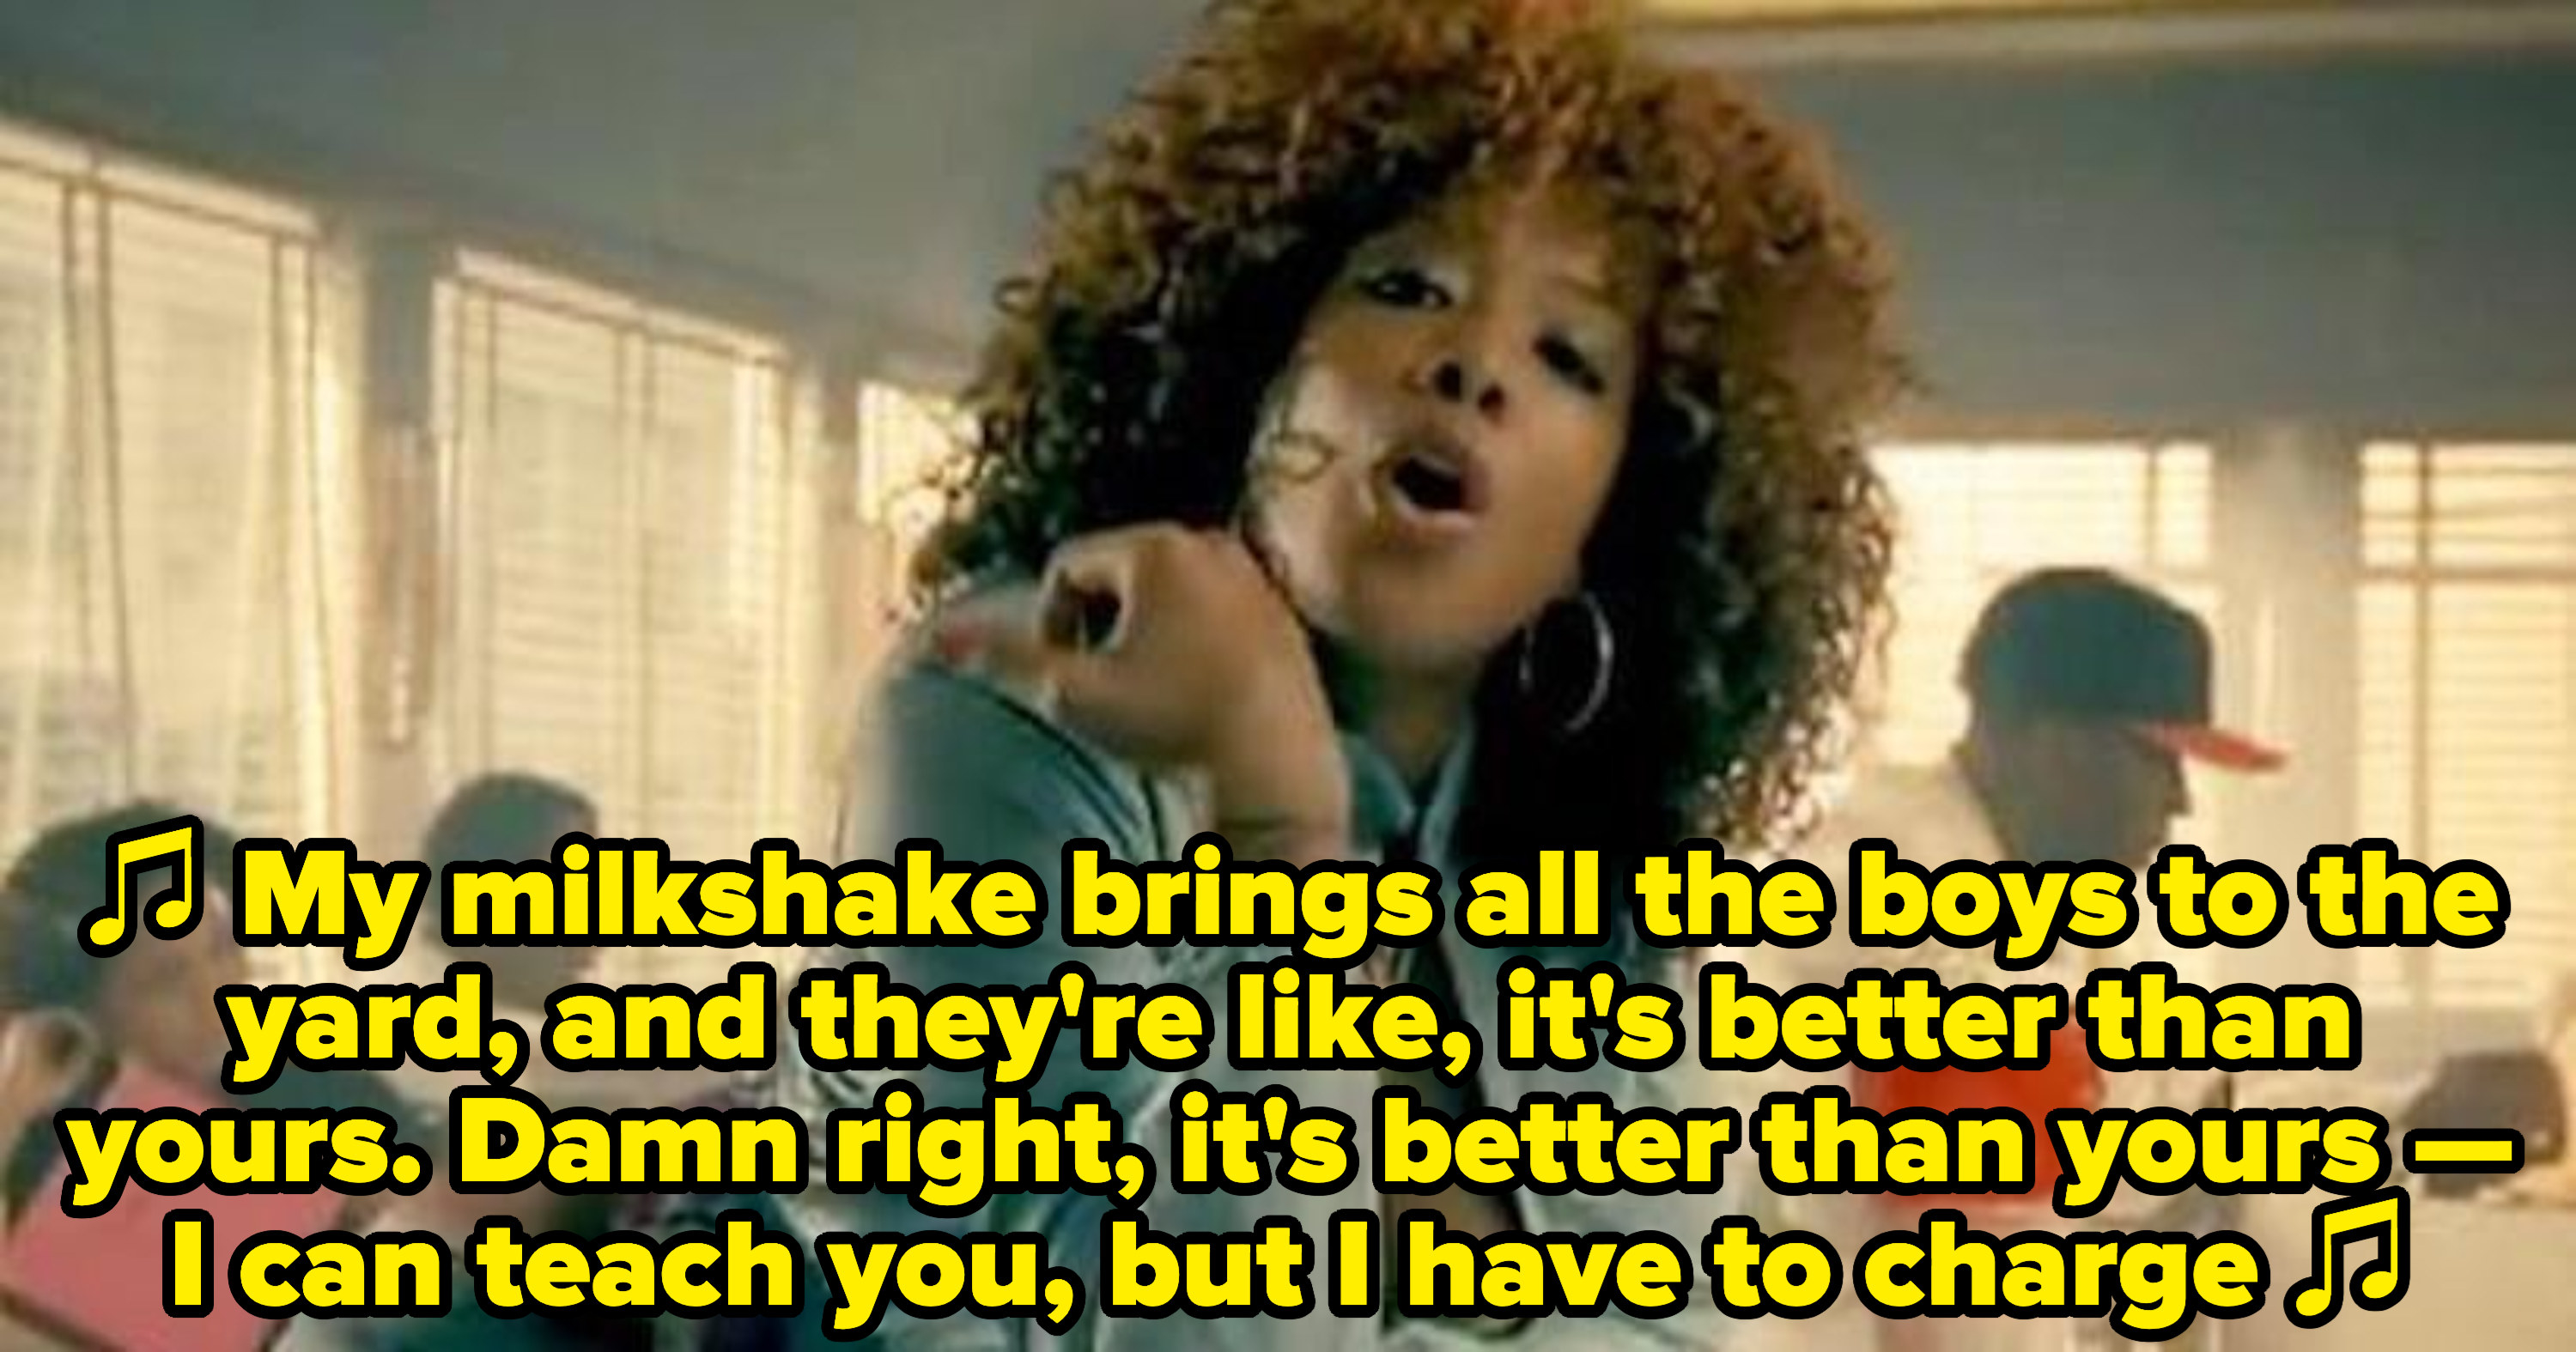 Kelis singing: &quot;&quot;My milkshake brings all the boys to the yard, and they&#x27;re like, it&#x27;s better than yours. Damn right, it&#x27;s better than yours -- I can teach you, but I have to charge&quot;